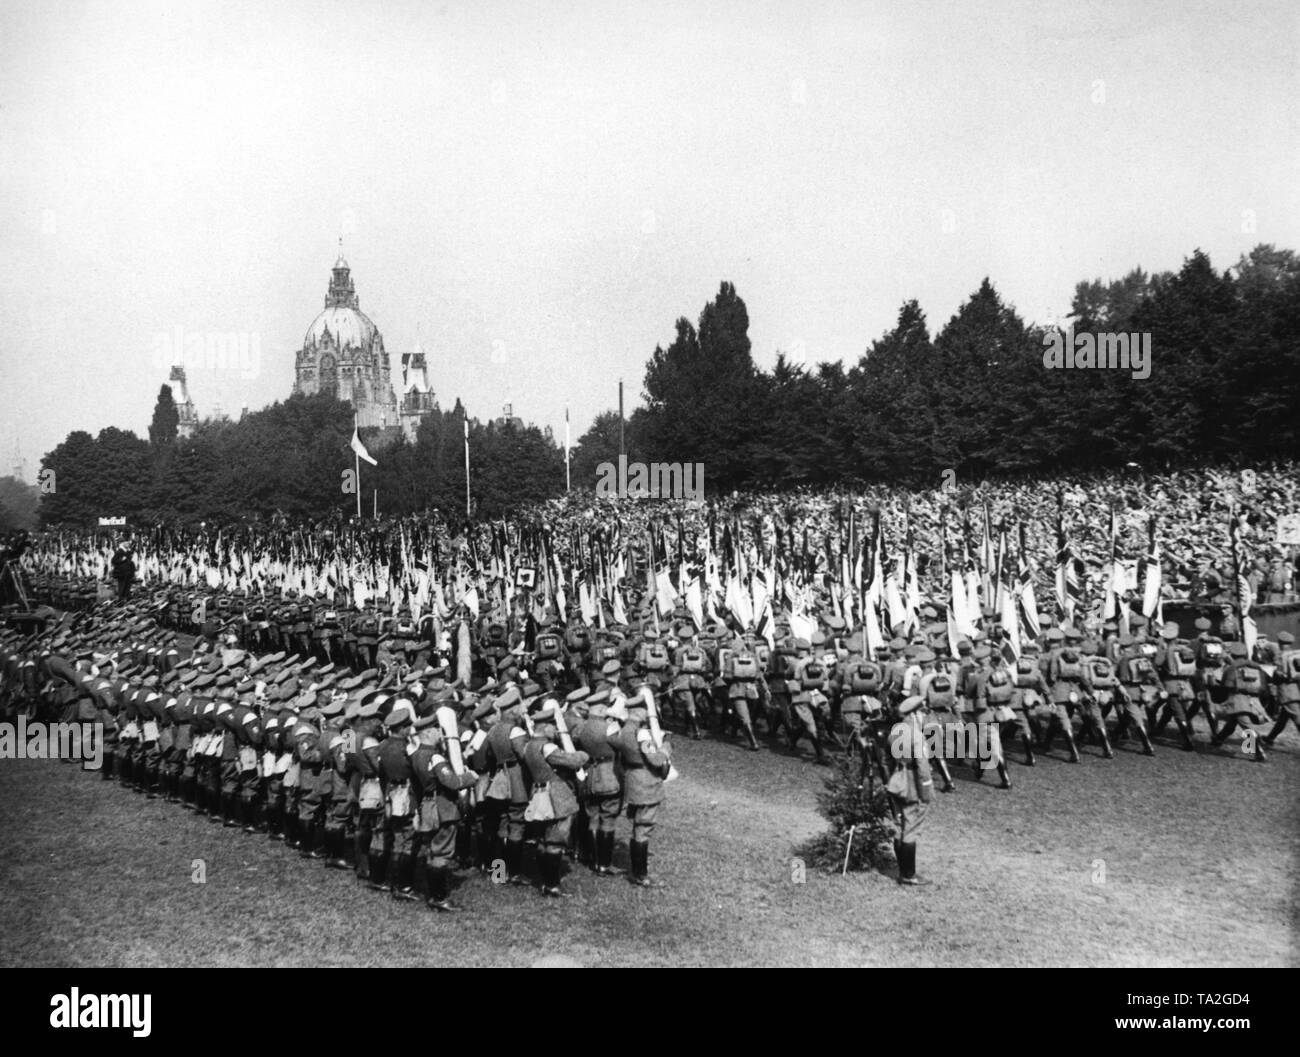 At the leaders' meeting of the Stahlhelm in Hanover, the delegations are marching past the Stabchef (Chief of Staff) of the SA, Ernst Rohm (right). In the background, the New Town Hall of Hanover. On the left, a music band. Stock Photo